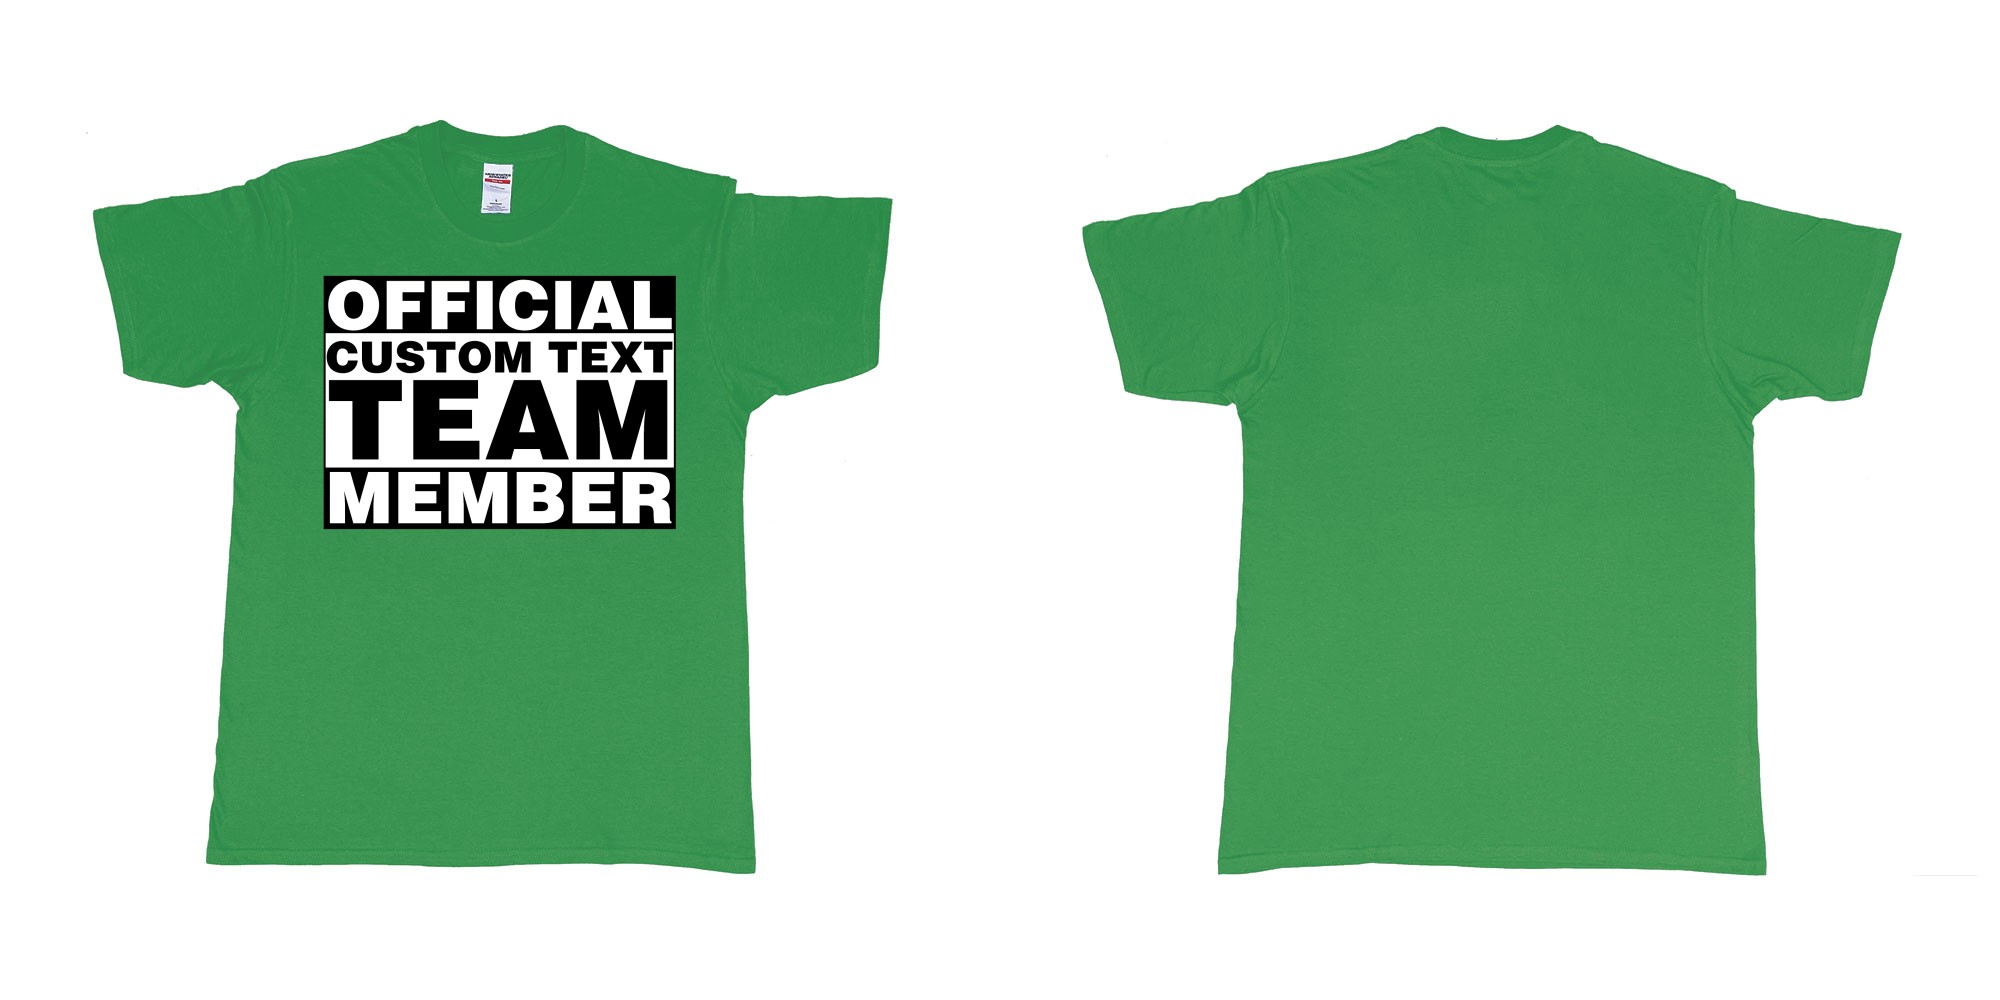 Custom tshirt design official custom text team member in fabric color irish-green choice your own text made in Bali by The Pirate Way